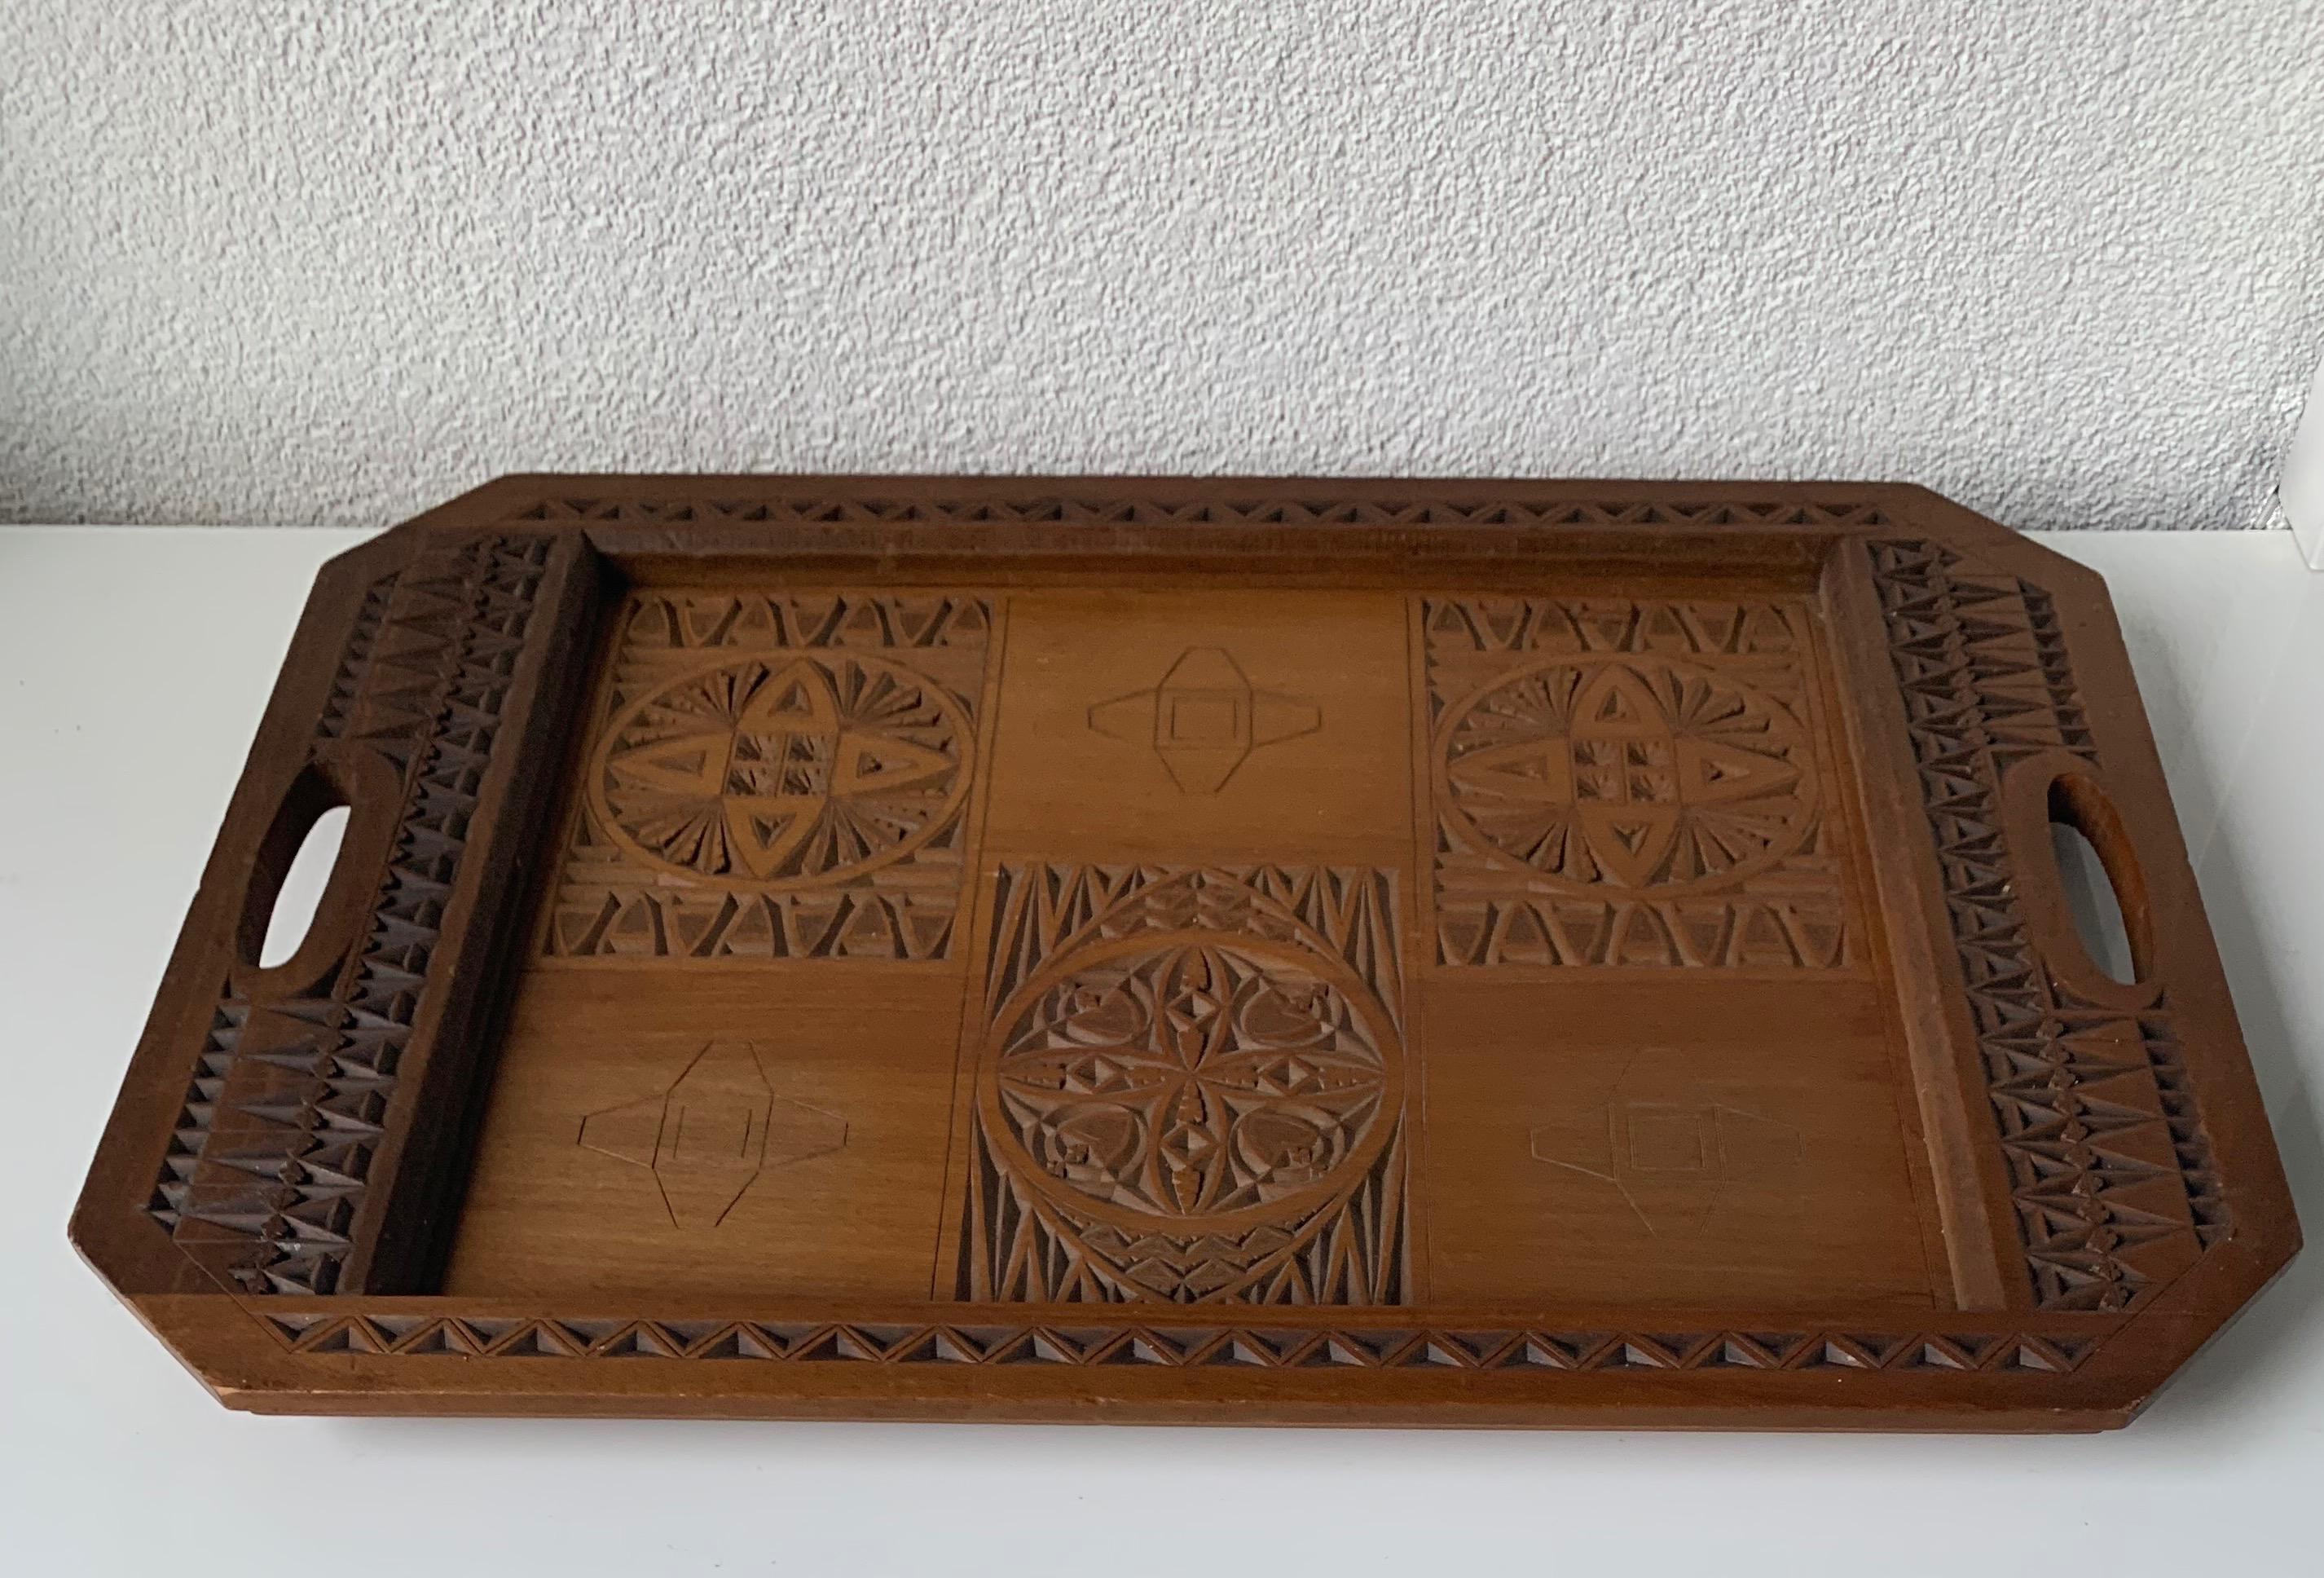 Unique Arts & Crafts serving tray in mint condition.

This museum quality and condition serving tray is another one of our recent great finds. The look and feel of this beautifully designed and finely executed serving tray is second to none and it